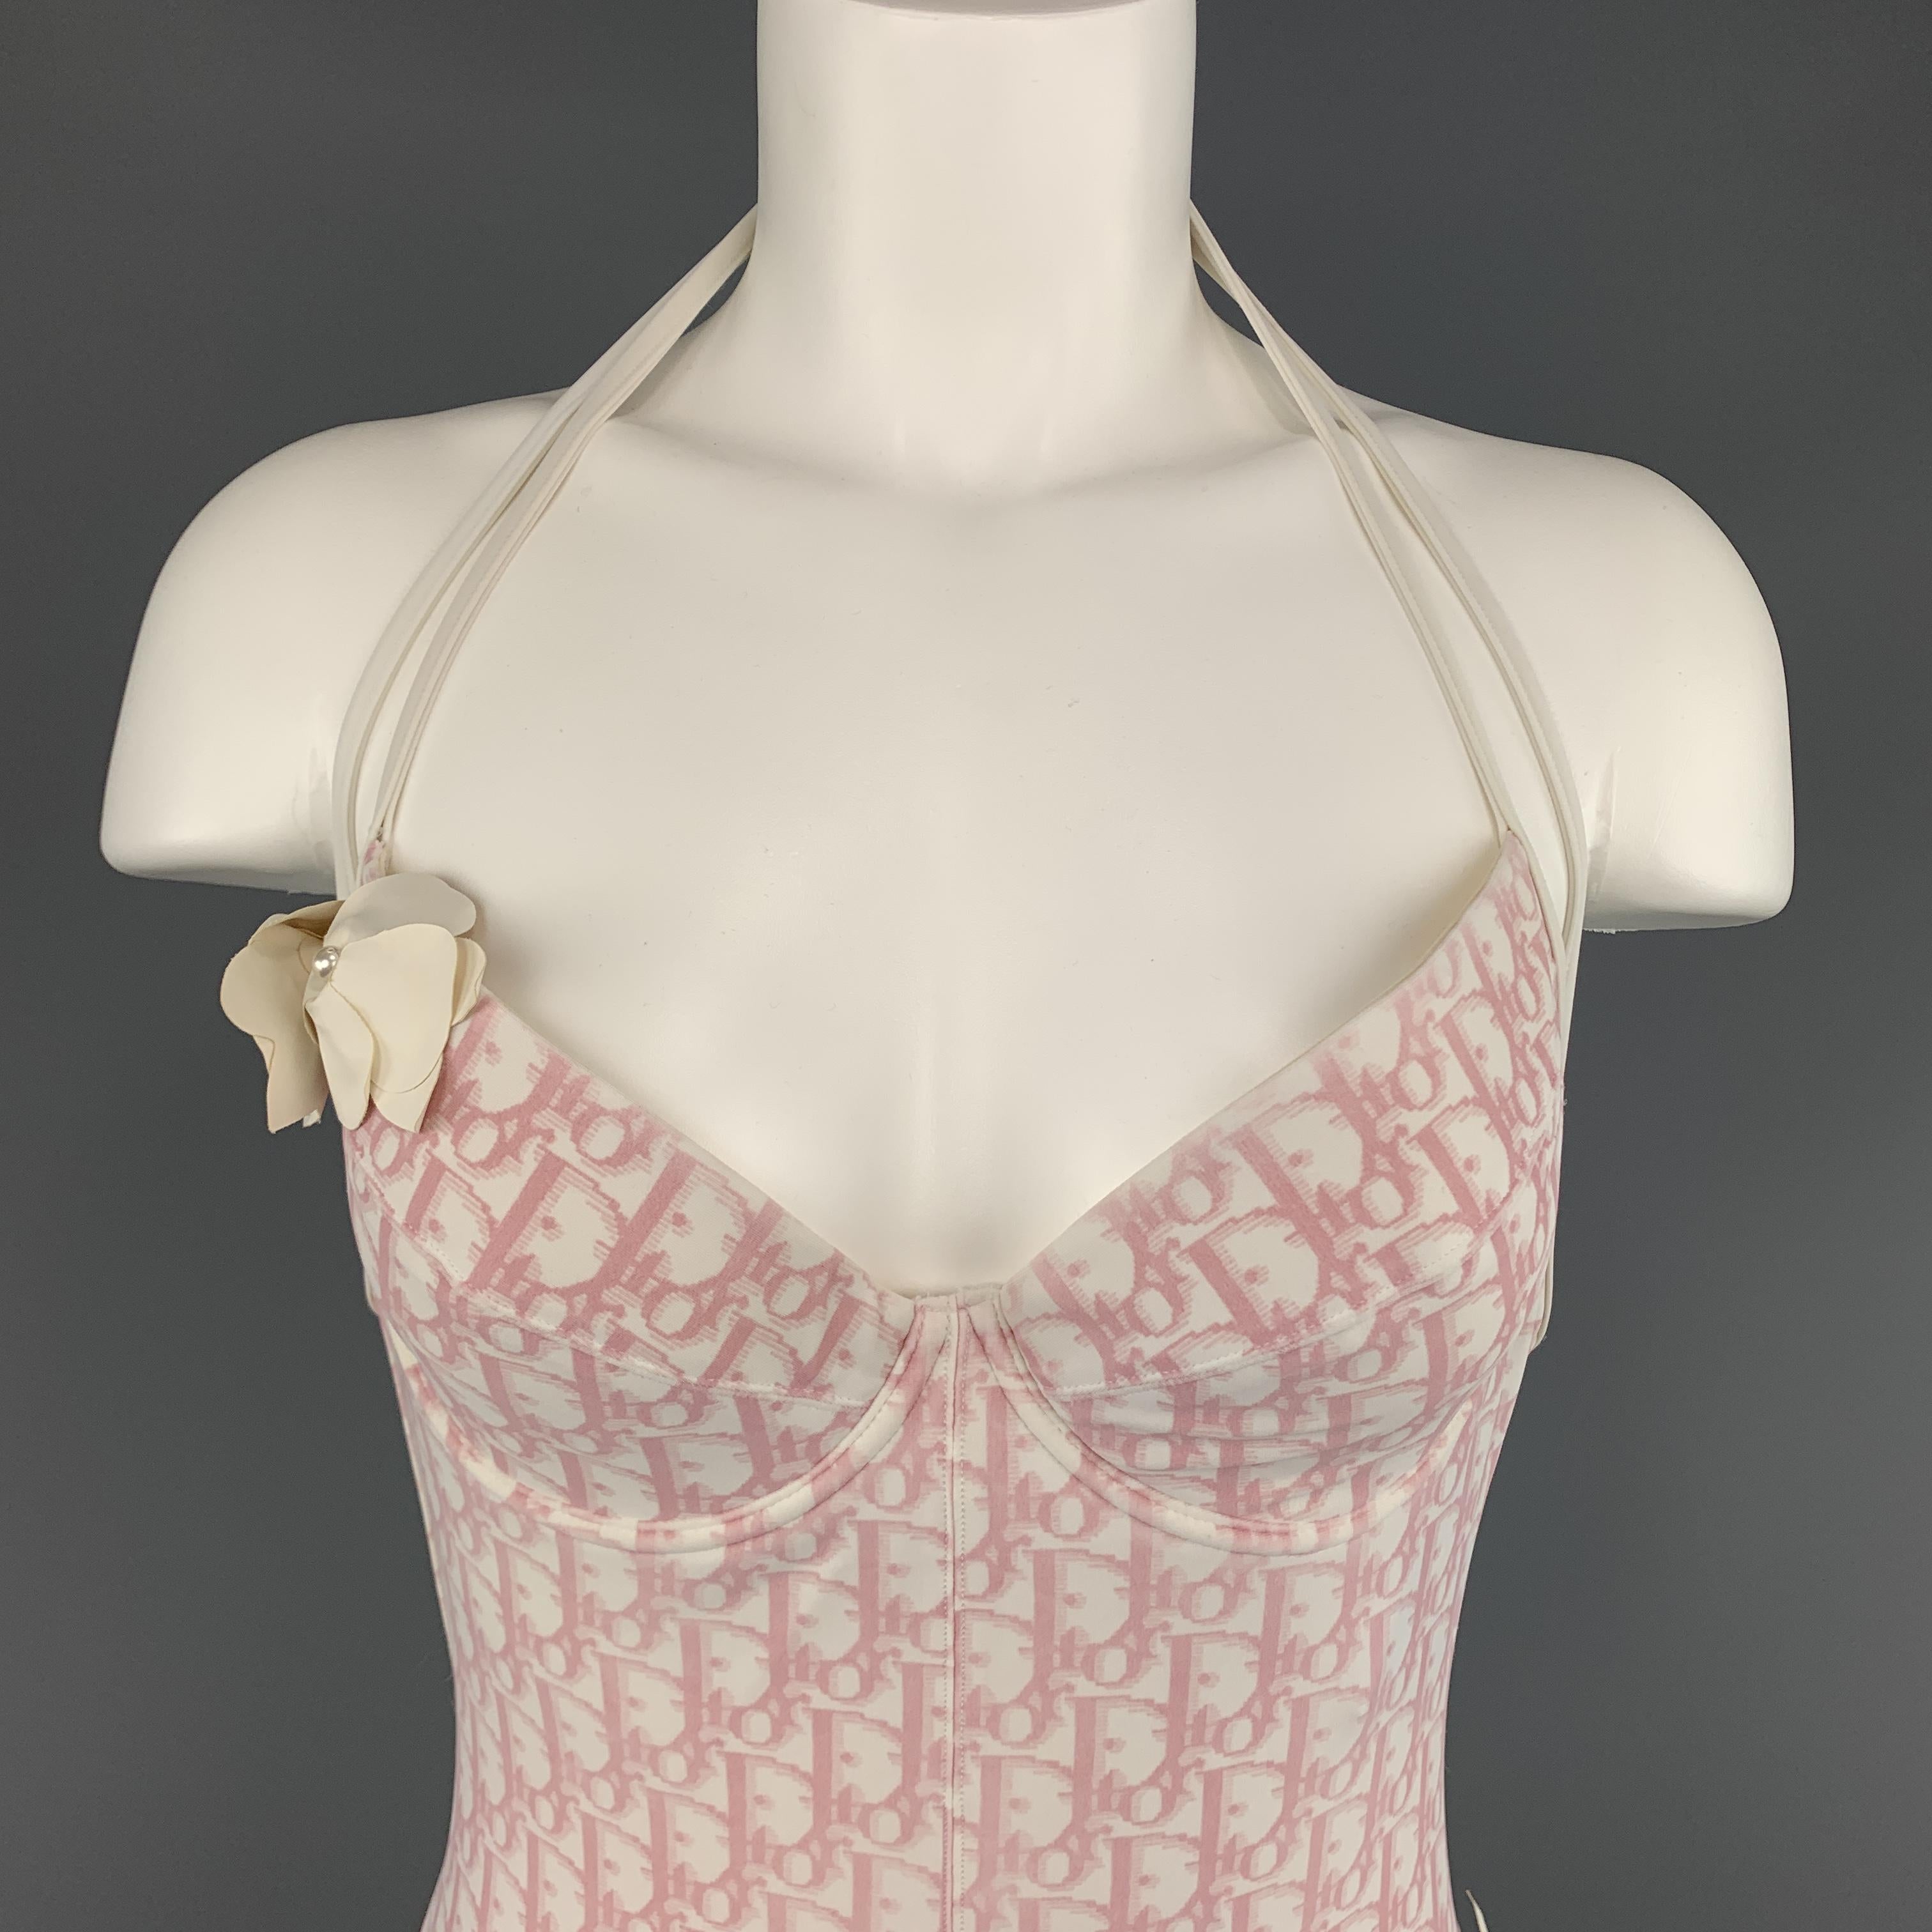 Archive CHRISTIAN DIOR by JOHN GALLIANO swimsuit bodysuit comes in classic pink and white Diorissimo monogram stretch nylon with a low back, halter top, and rhinestone and floral appliques. Missing faux pearl on flower at hip. As-is. Made in